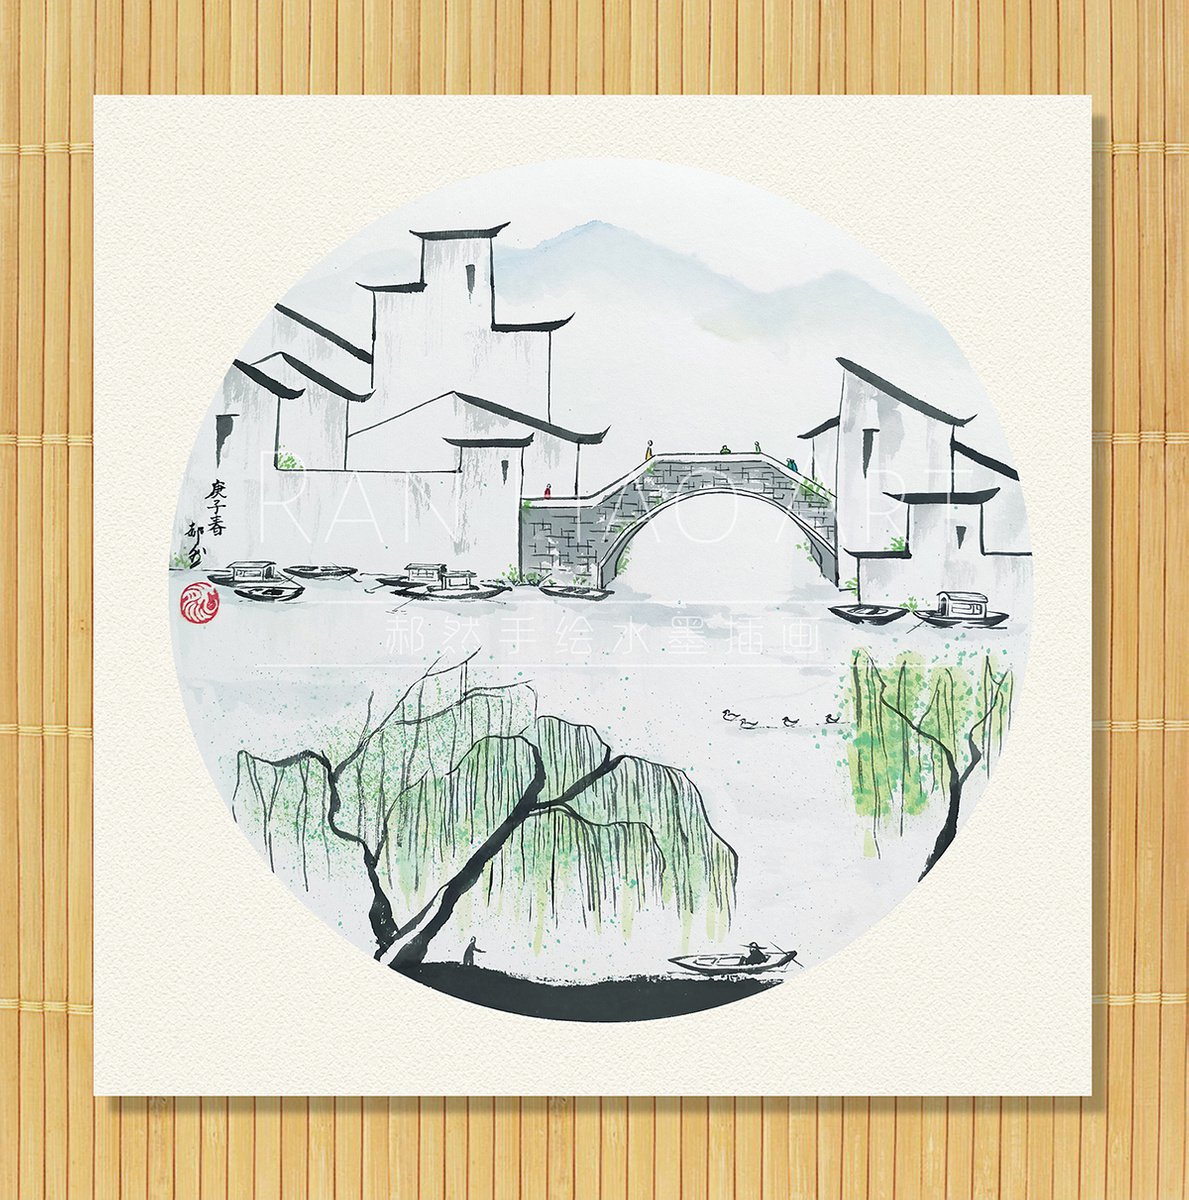 RAN ART - Chinese painting 38*38cm - Water Village by RAN HAO